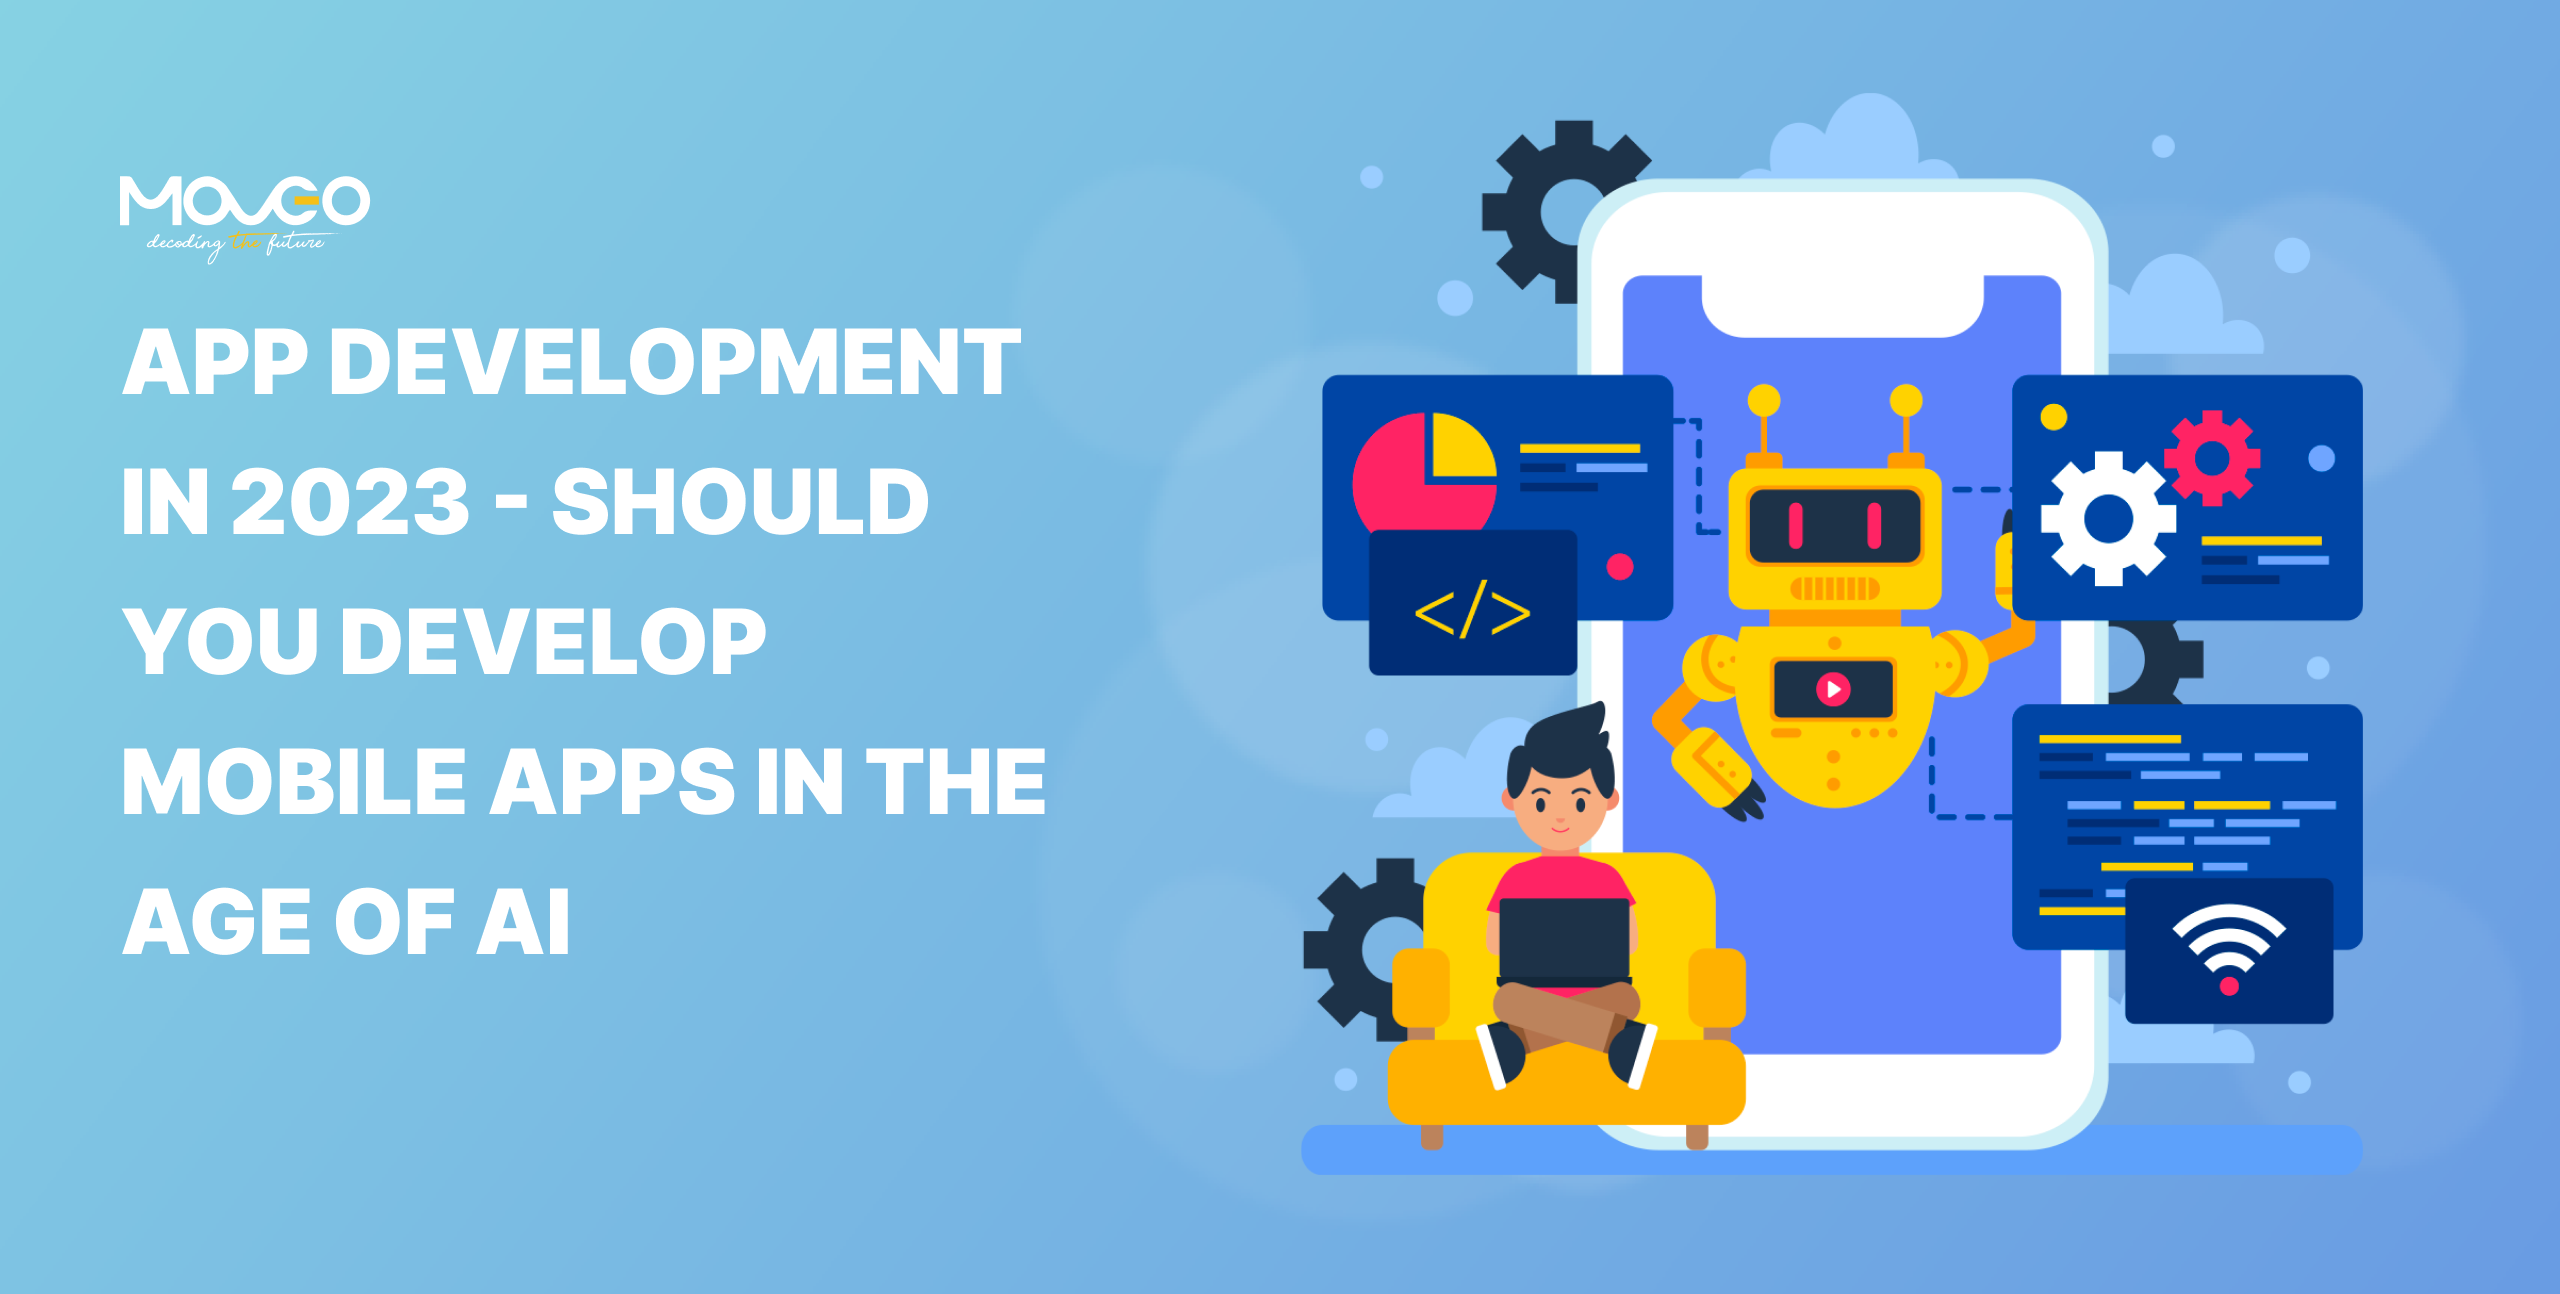 App Development In 2023 Should You Develop Mobile Apps in the Age of